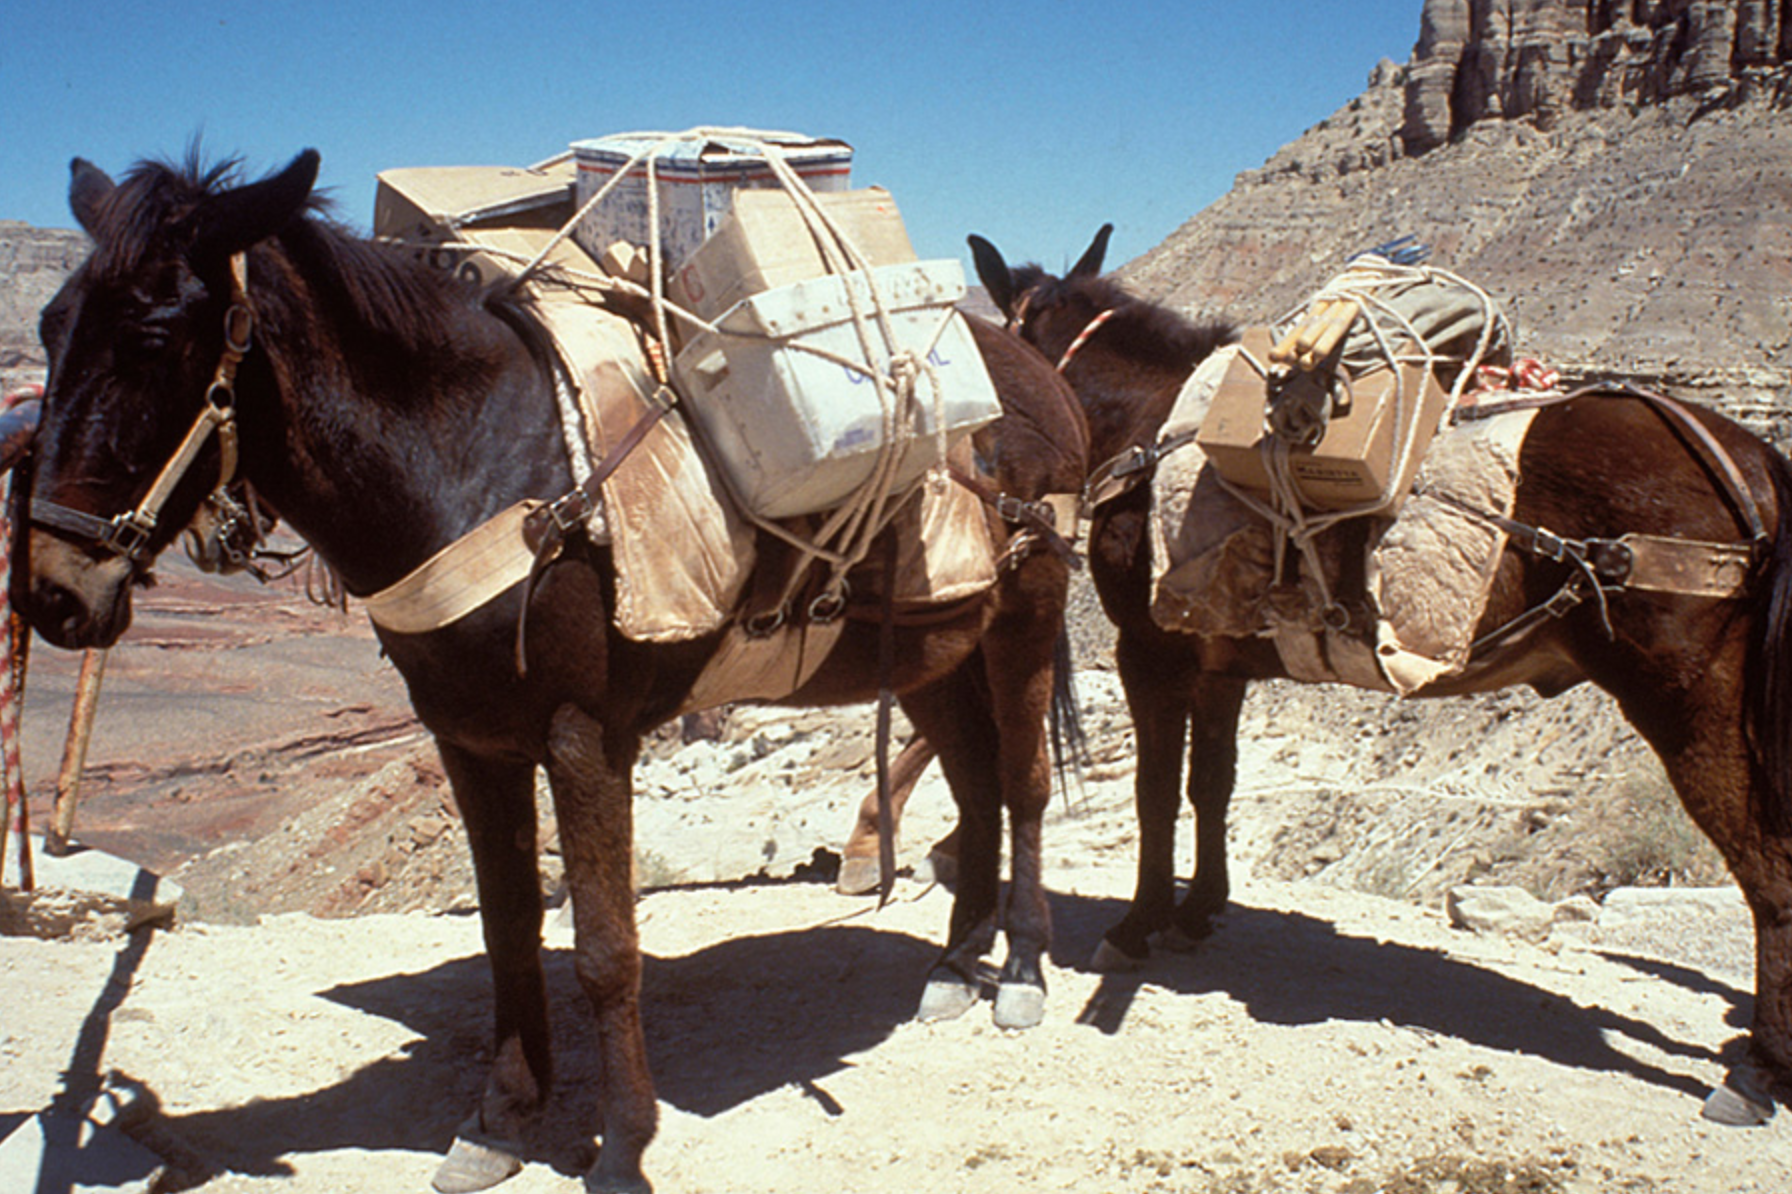 USPS still uses mules to deliver mail to Supai, Arizona